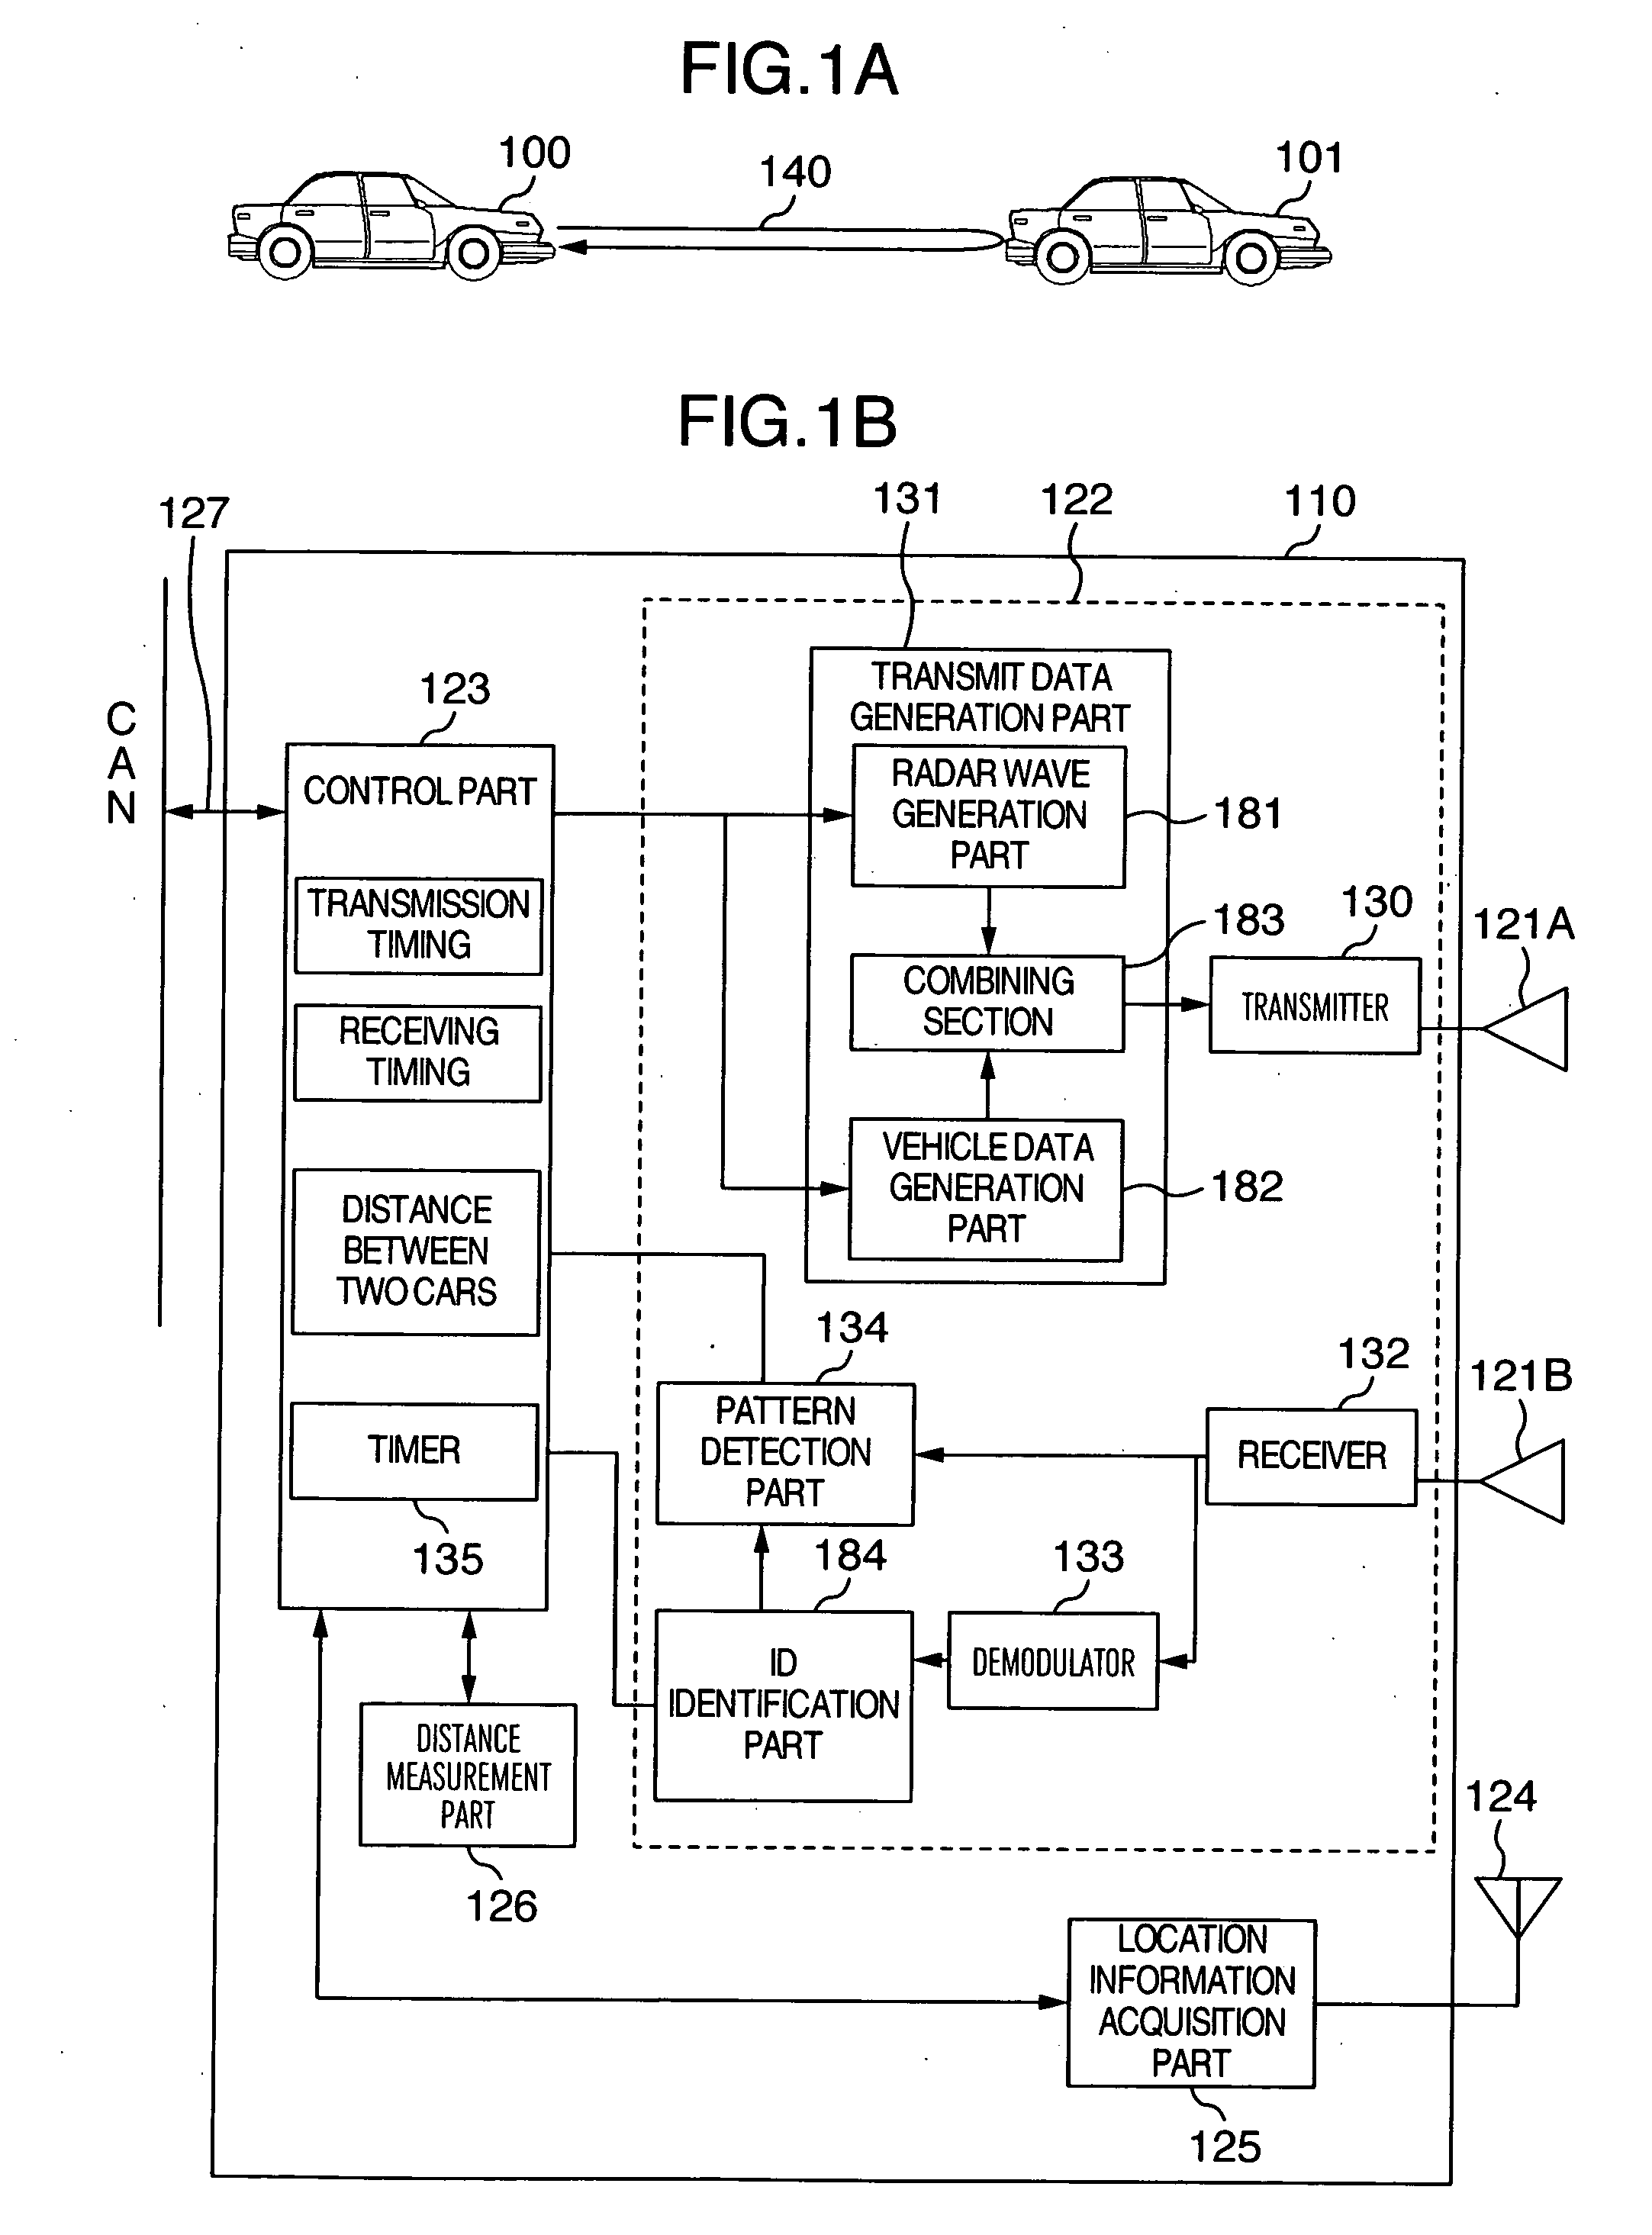 In-vehicle radar device and communication device